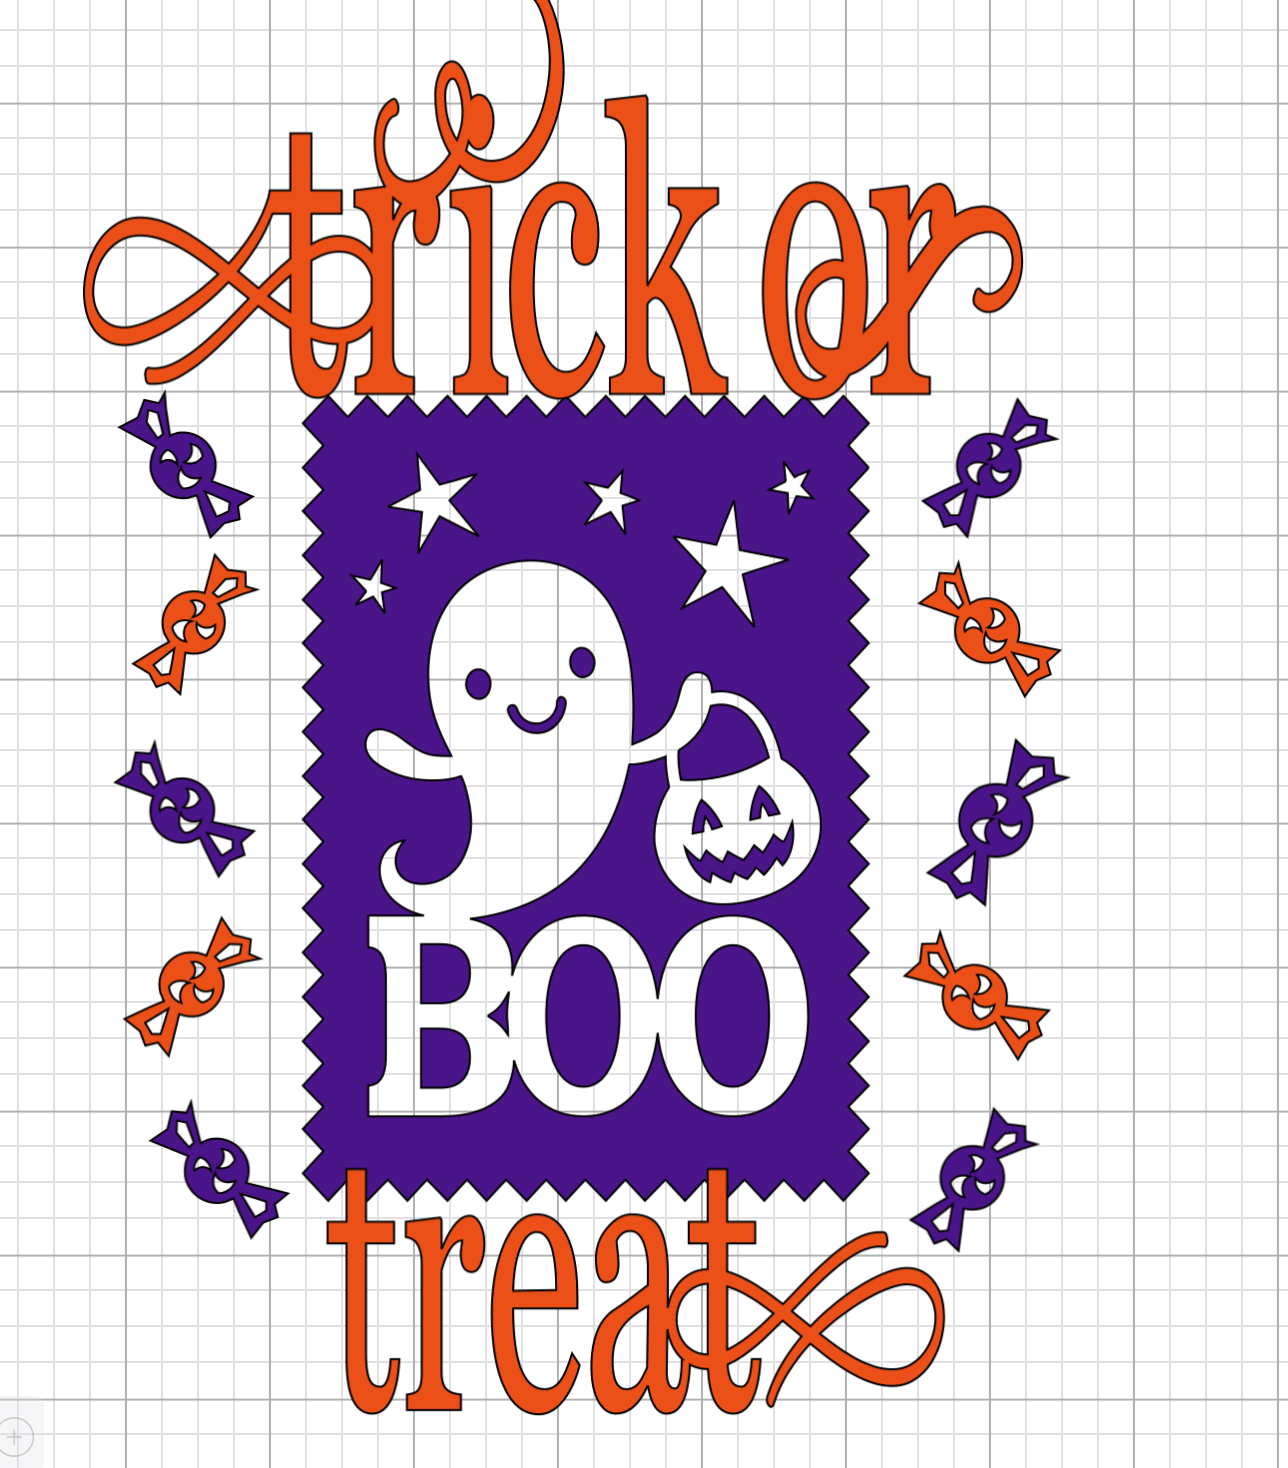 Halloween image for Trick or treat bag